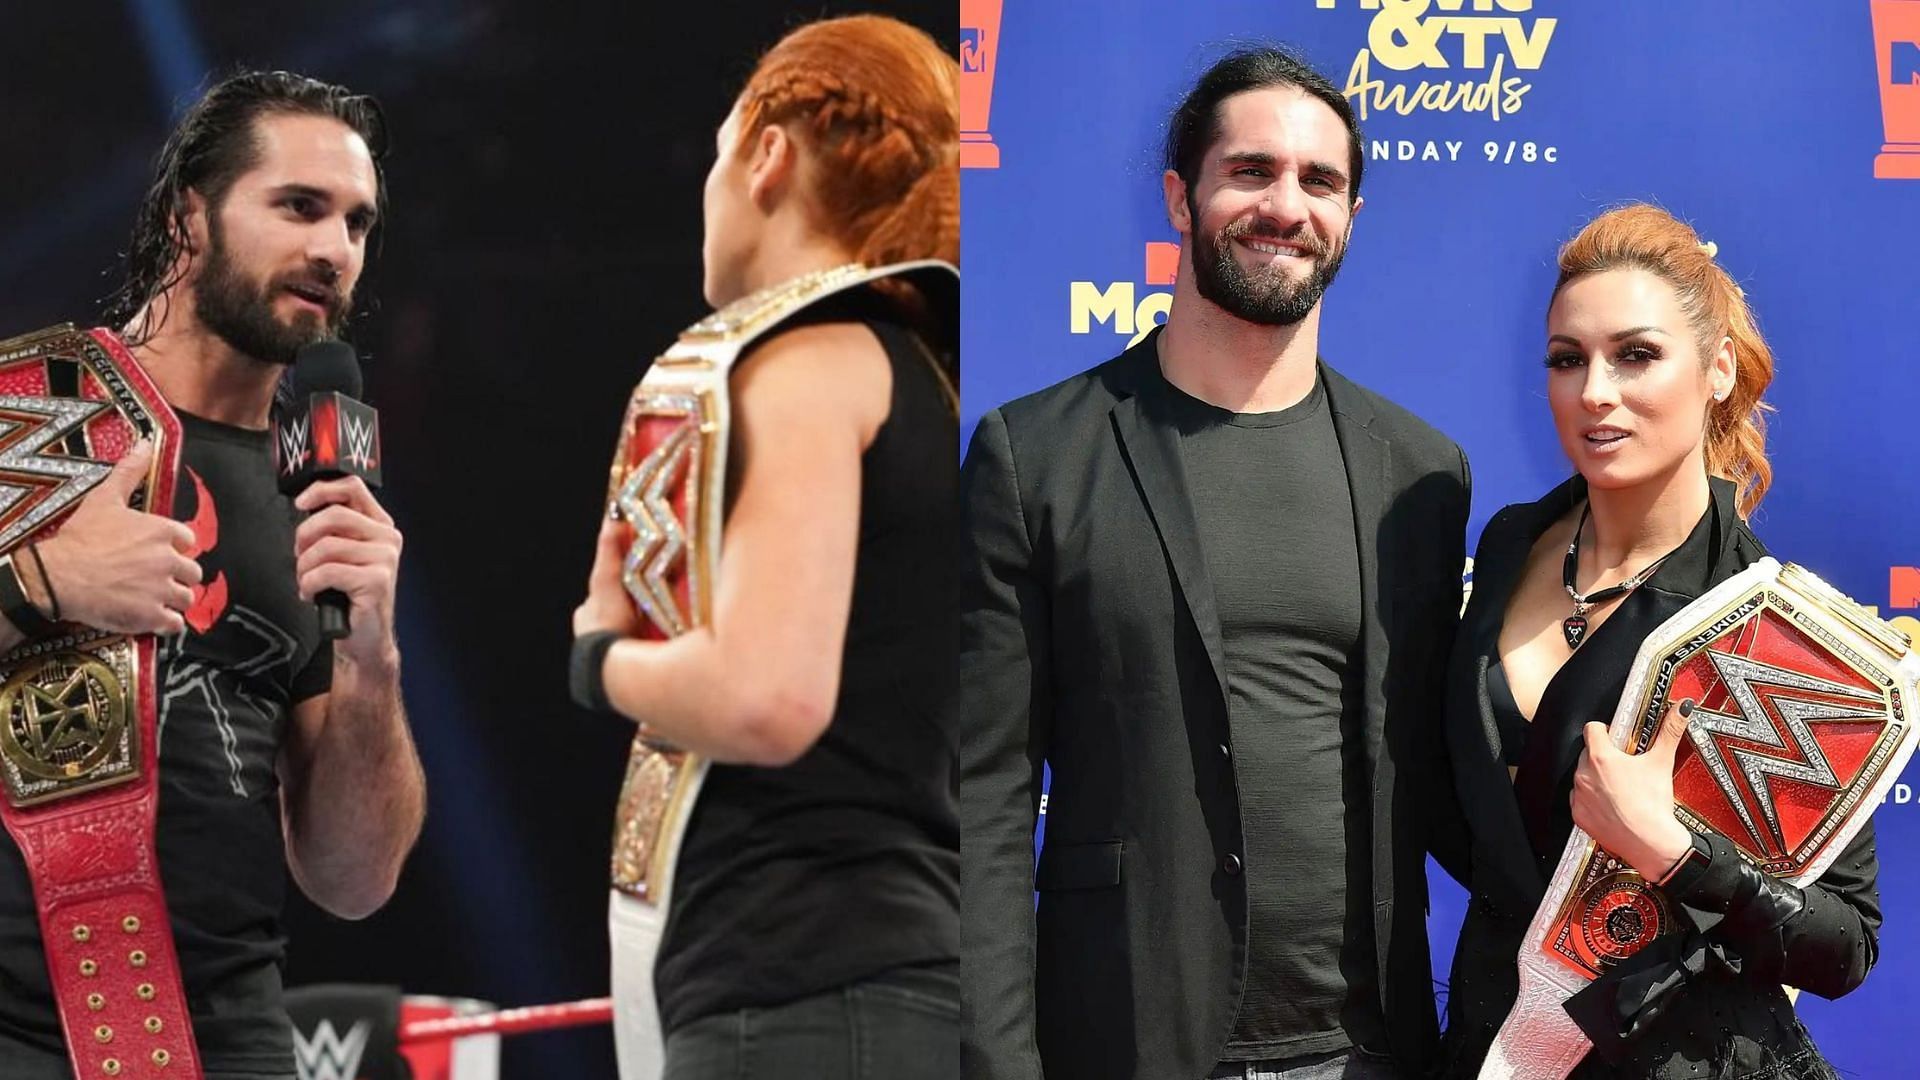 Seth Rollins and Becky Lynch will be in action at Night of Champions